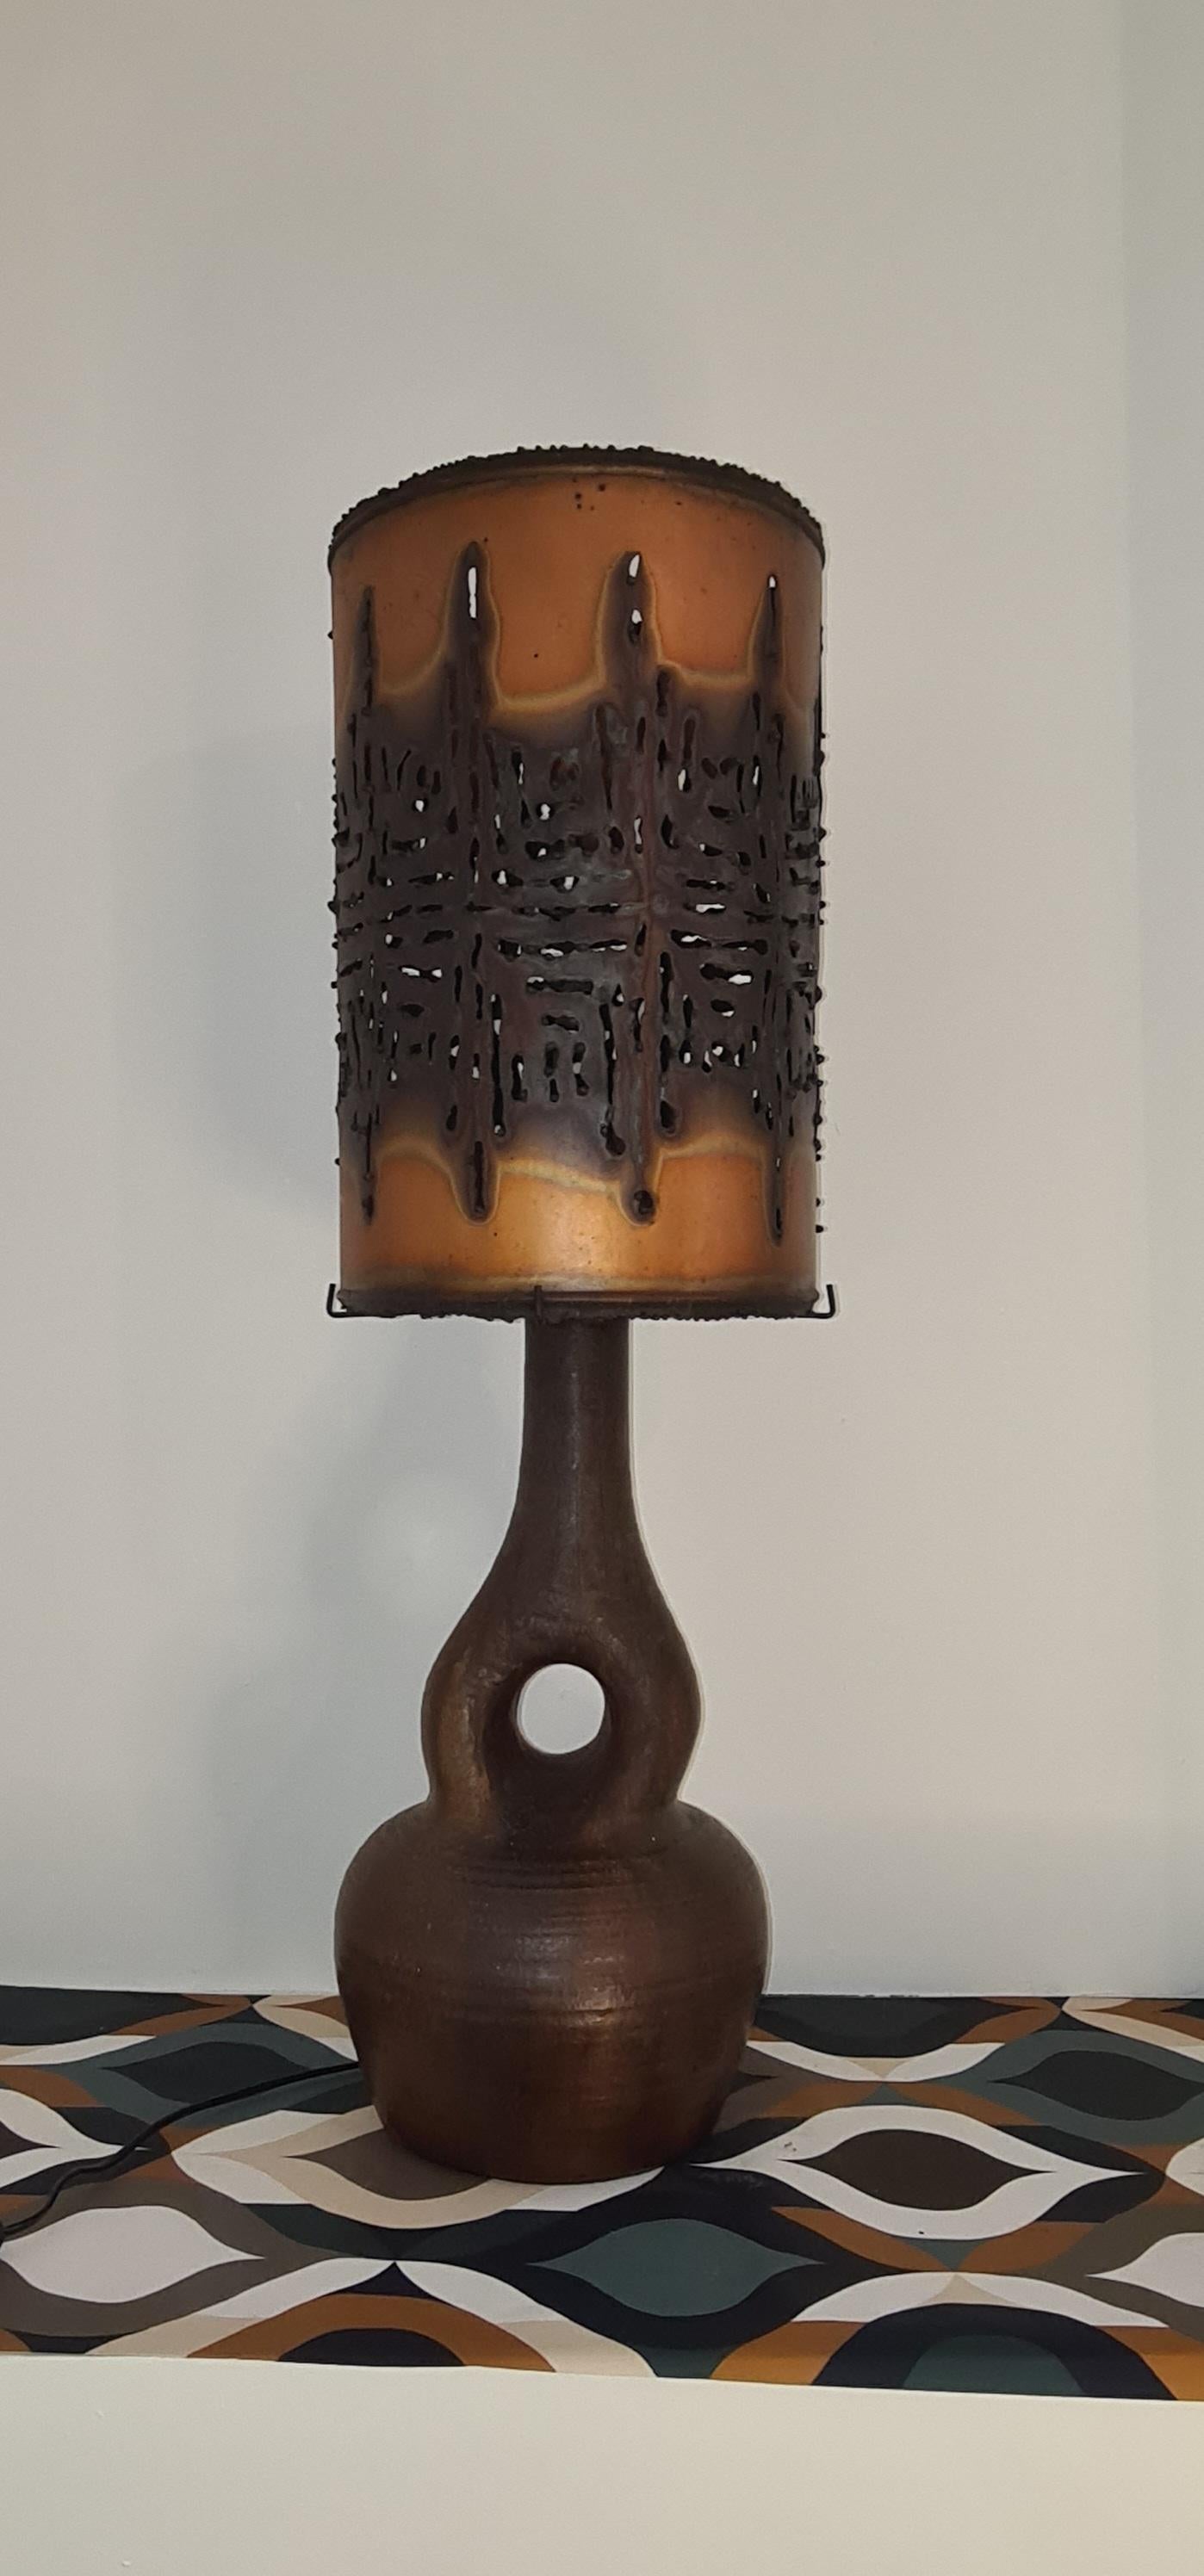 magnificent Accolay ceramic lamp, all the originality of the lamp is in the imposing perforated copper lampshade which diffuses a soft light.
The lampshade rests on a base composed of 4 iron rods, one of these rods is slightly twisted which does